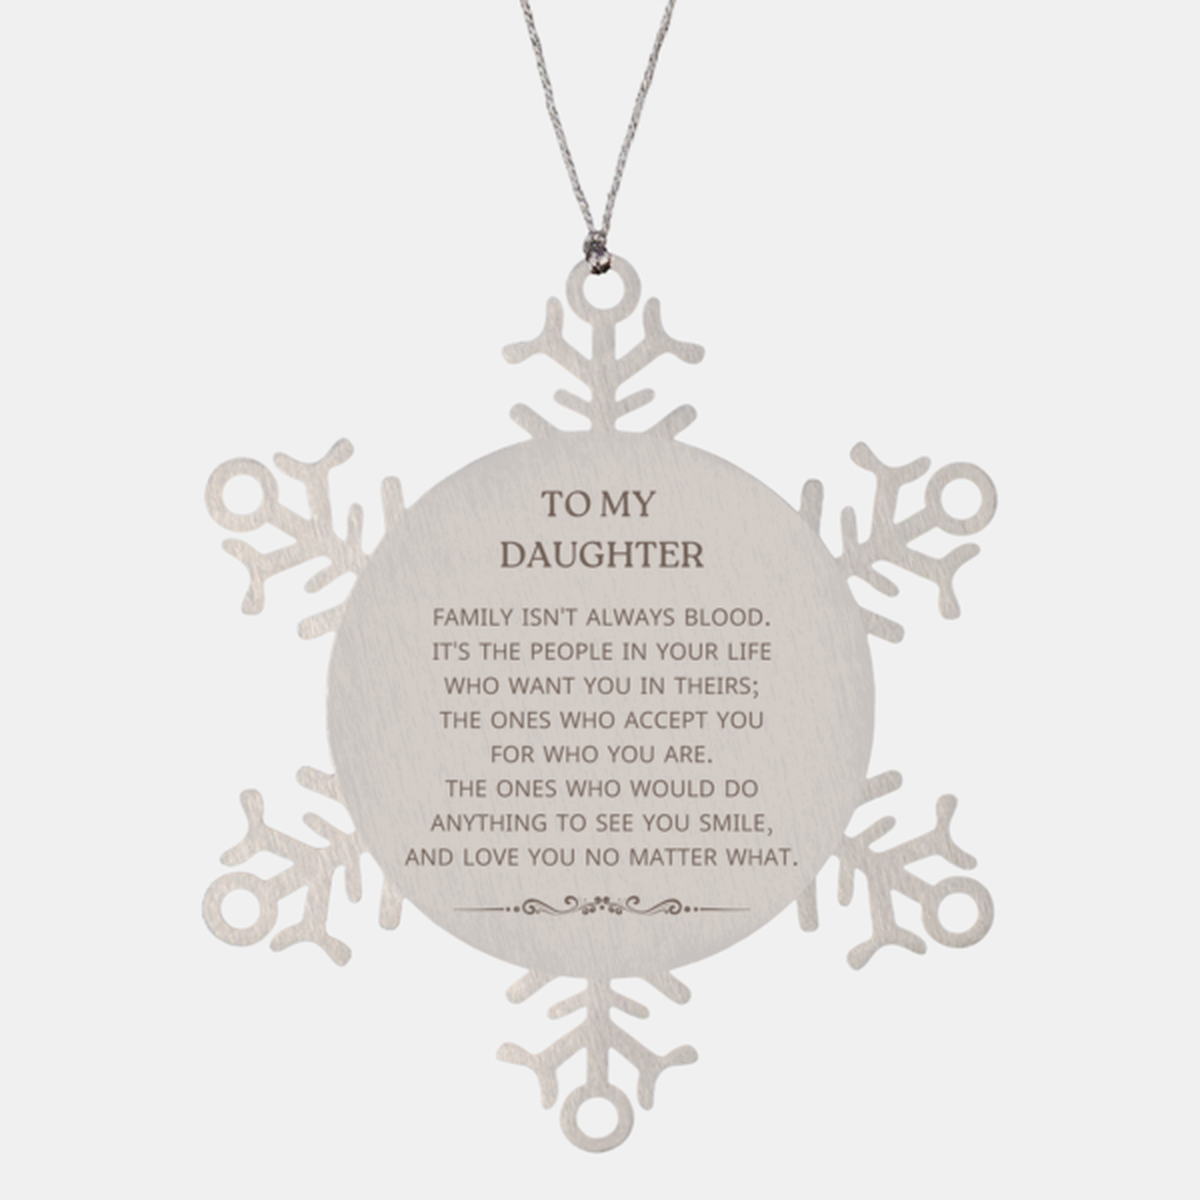 To My Daughter Gifts, Family isn't always blood, Daughter Snowflake Ornament, Birthday Christmas Unique Present For Daughter